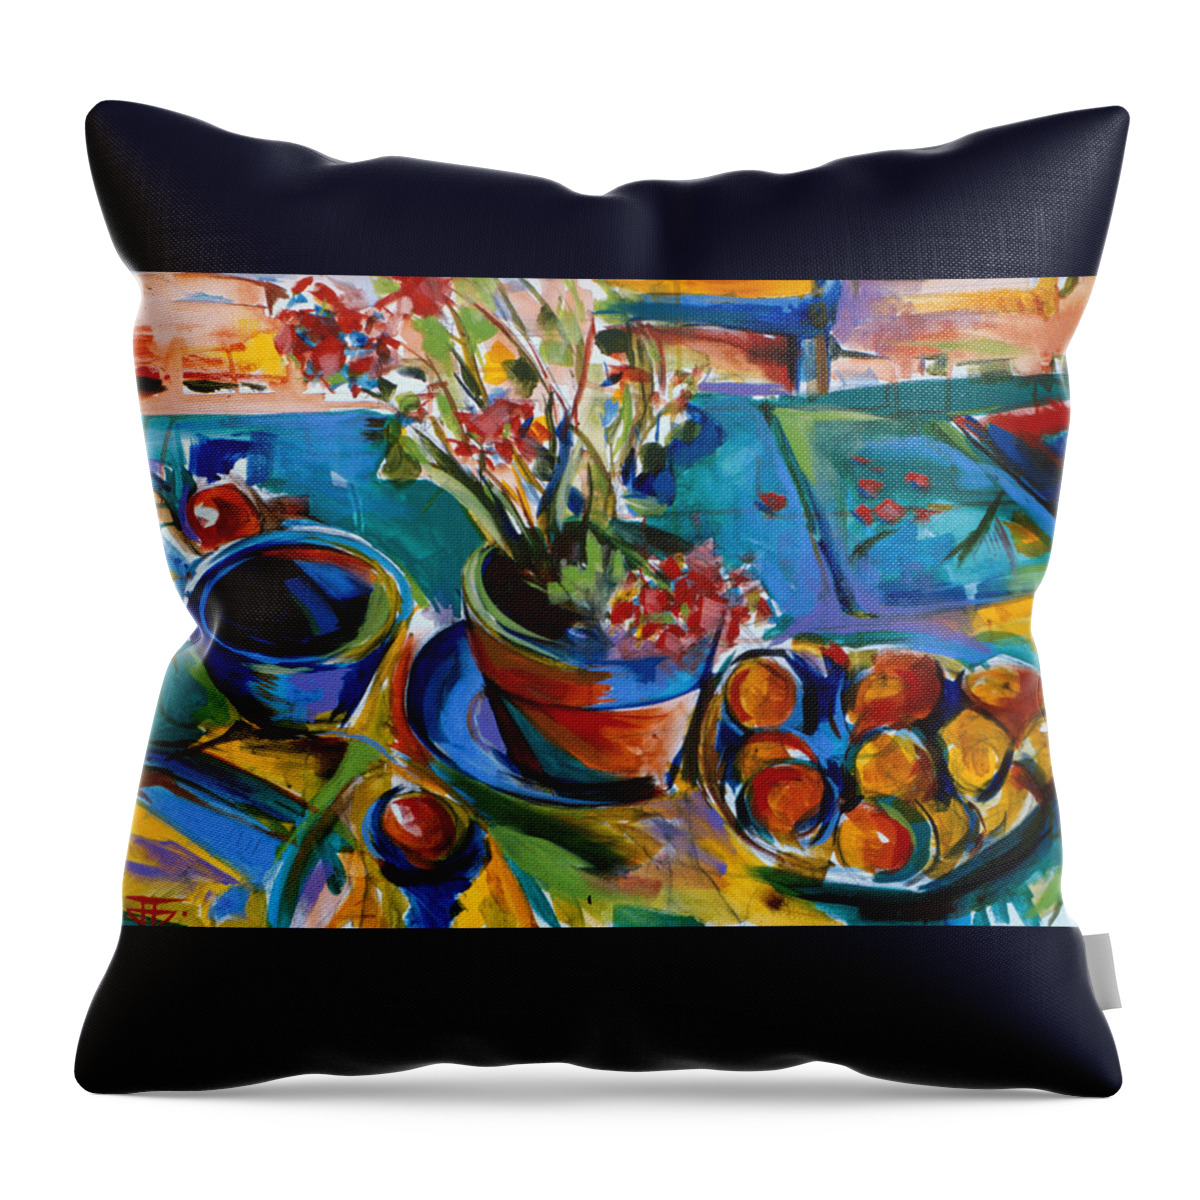 Oranges Throw Pillow featuring the painting Oranges by John Gholson